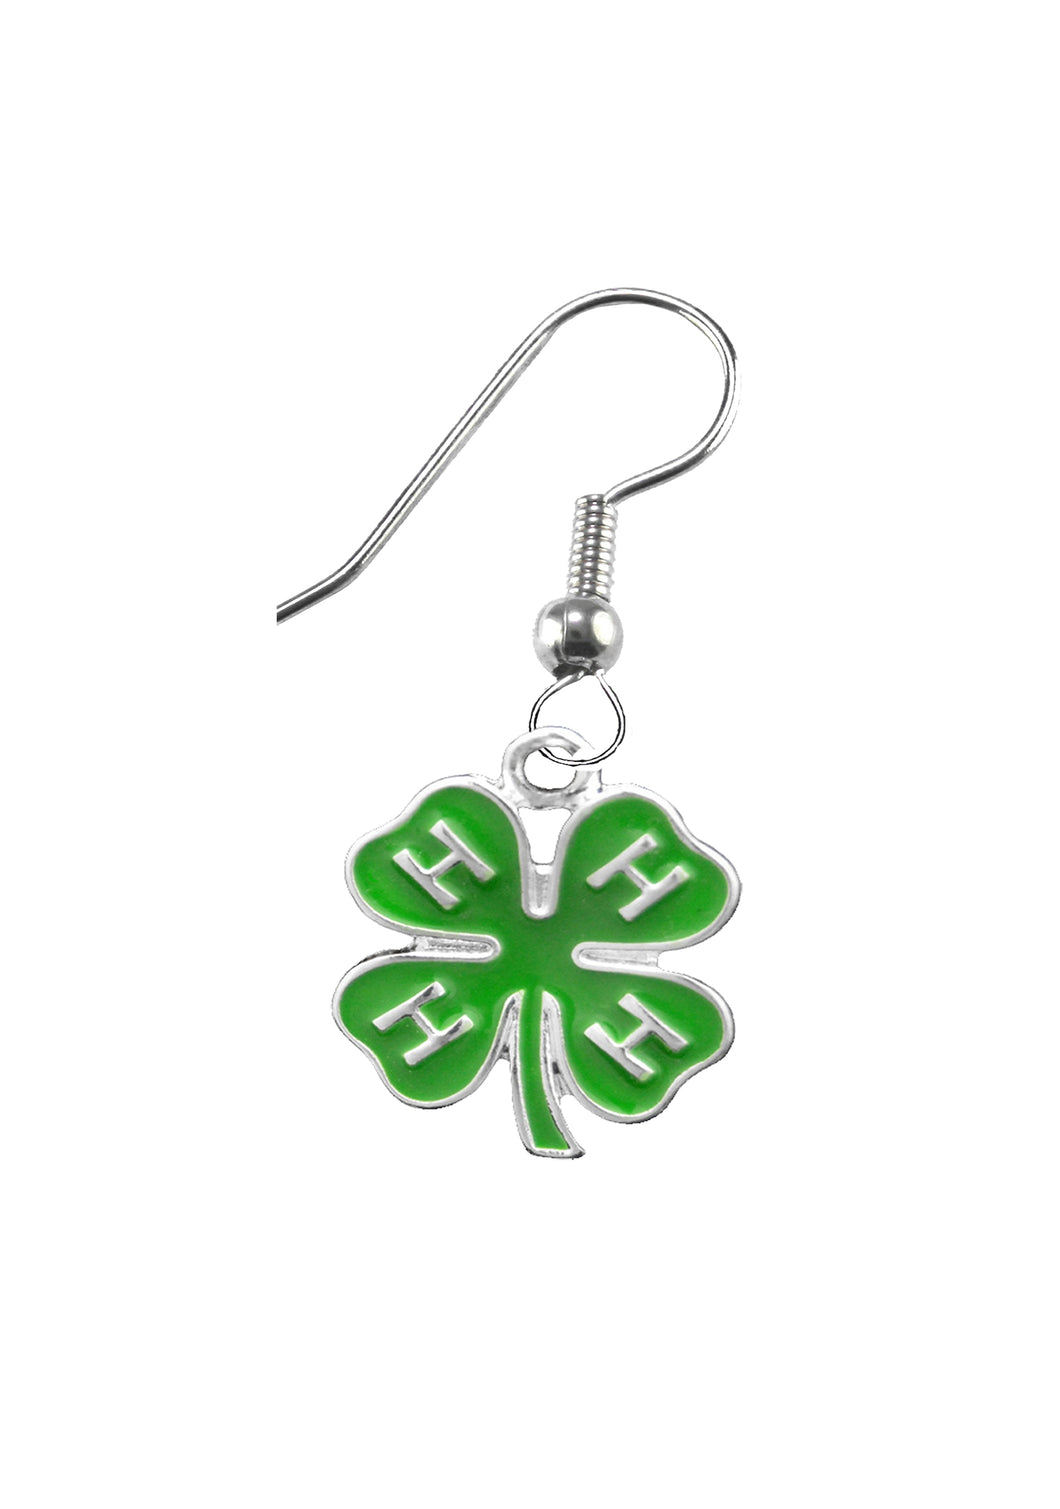 4-H Club Earrings, Hypoallergenic, Safe-No Nickel, No Lead And No Poisonous Cadmium In The Metal.  Will Not Irritate Anyone With Sensitive Skin | © 2023, Free Shipping. Designed And Made In The U.S.A.